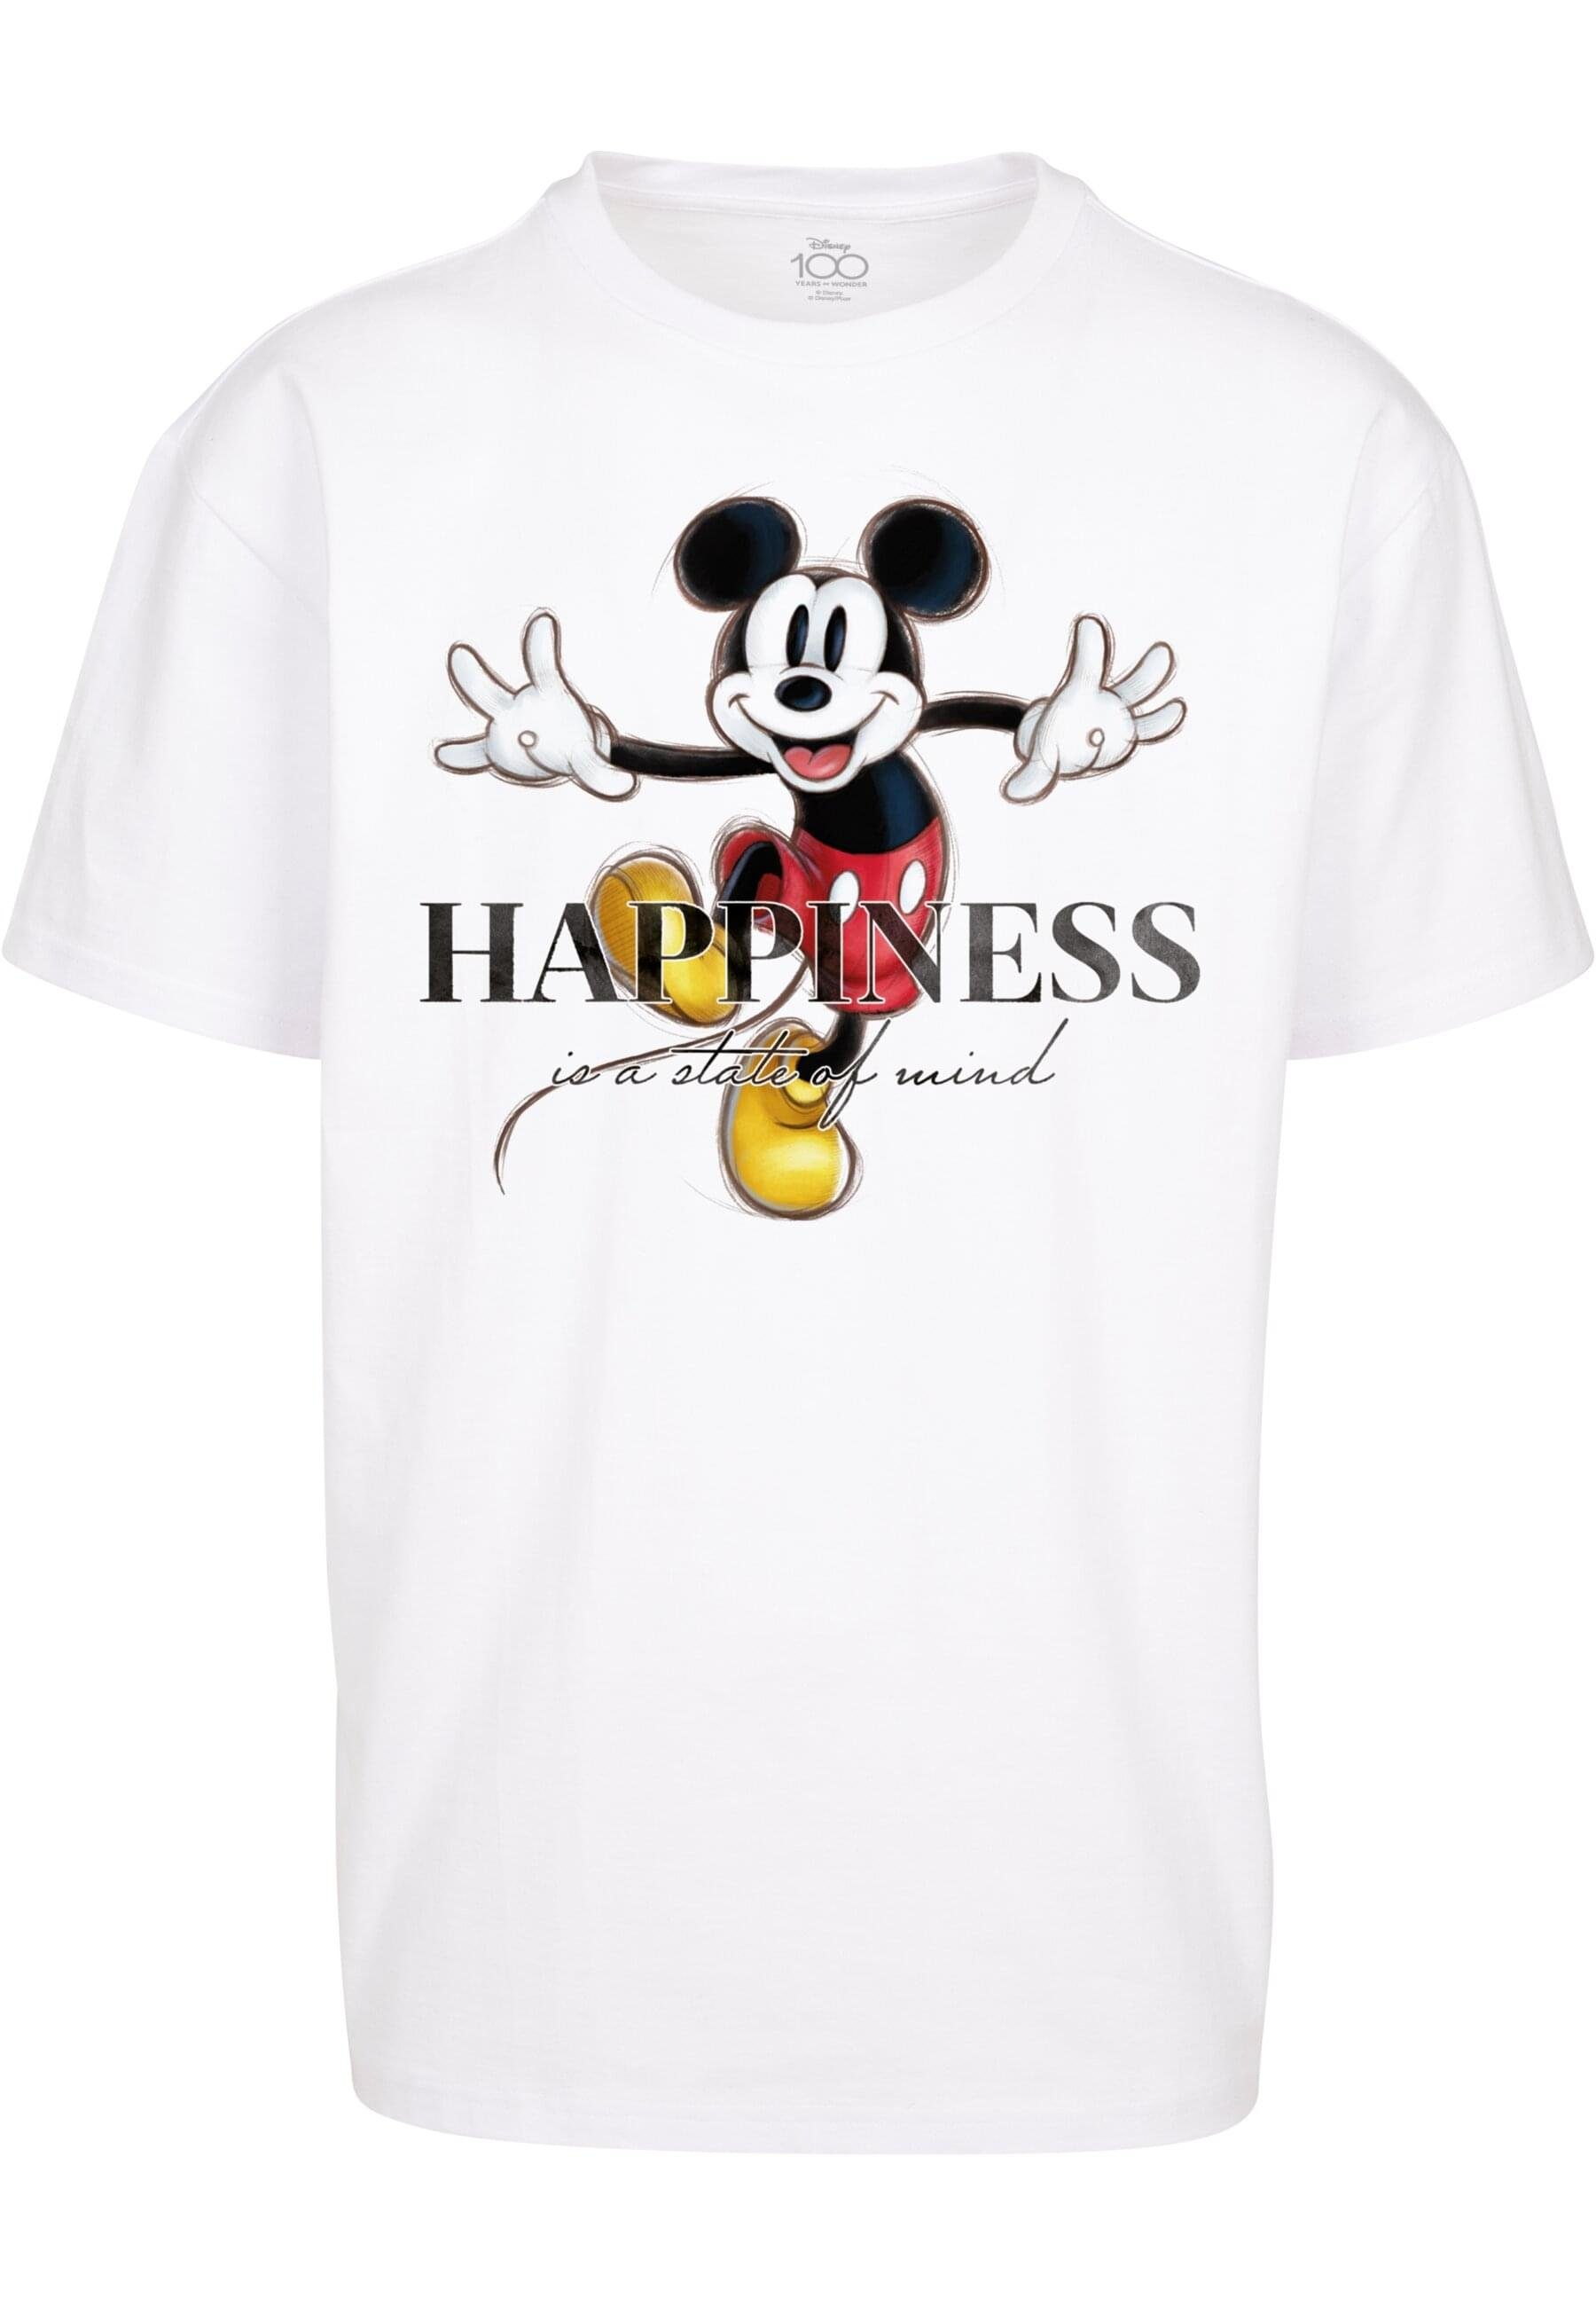 Tee Disney Mickey Mister 100 Unisex by Oversize Upscale T-Shirt Tee Happiness (1-tlg)